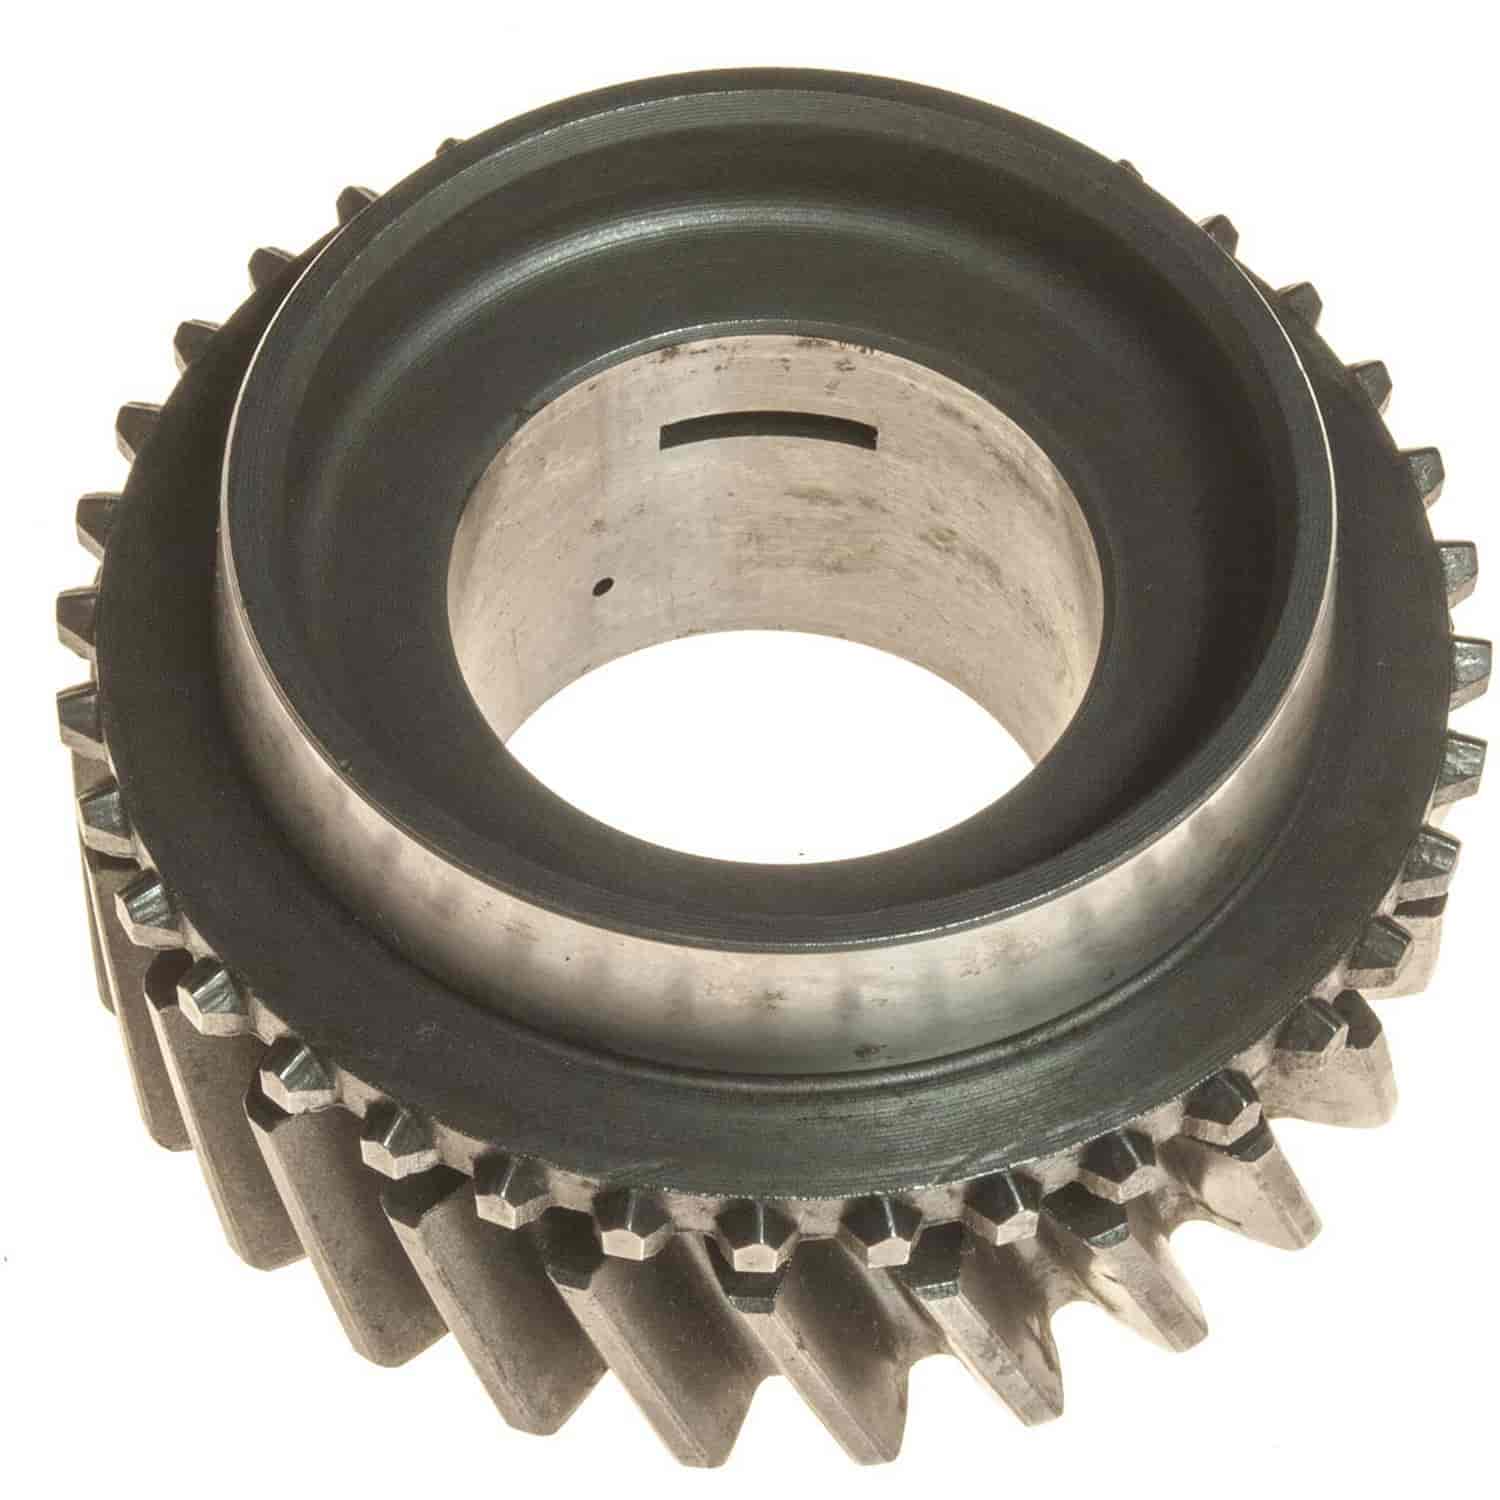 6th Gear Mainshaft 25/34 Tooth Count